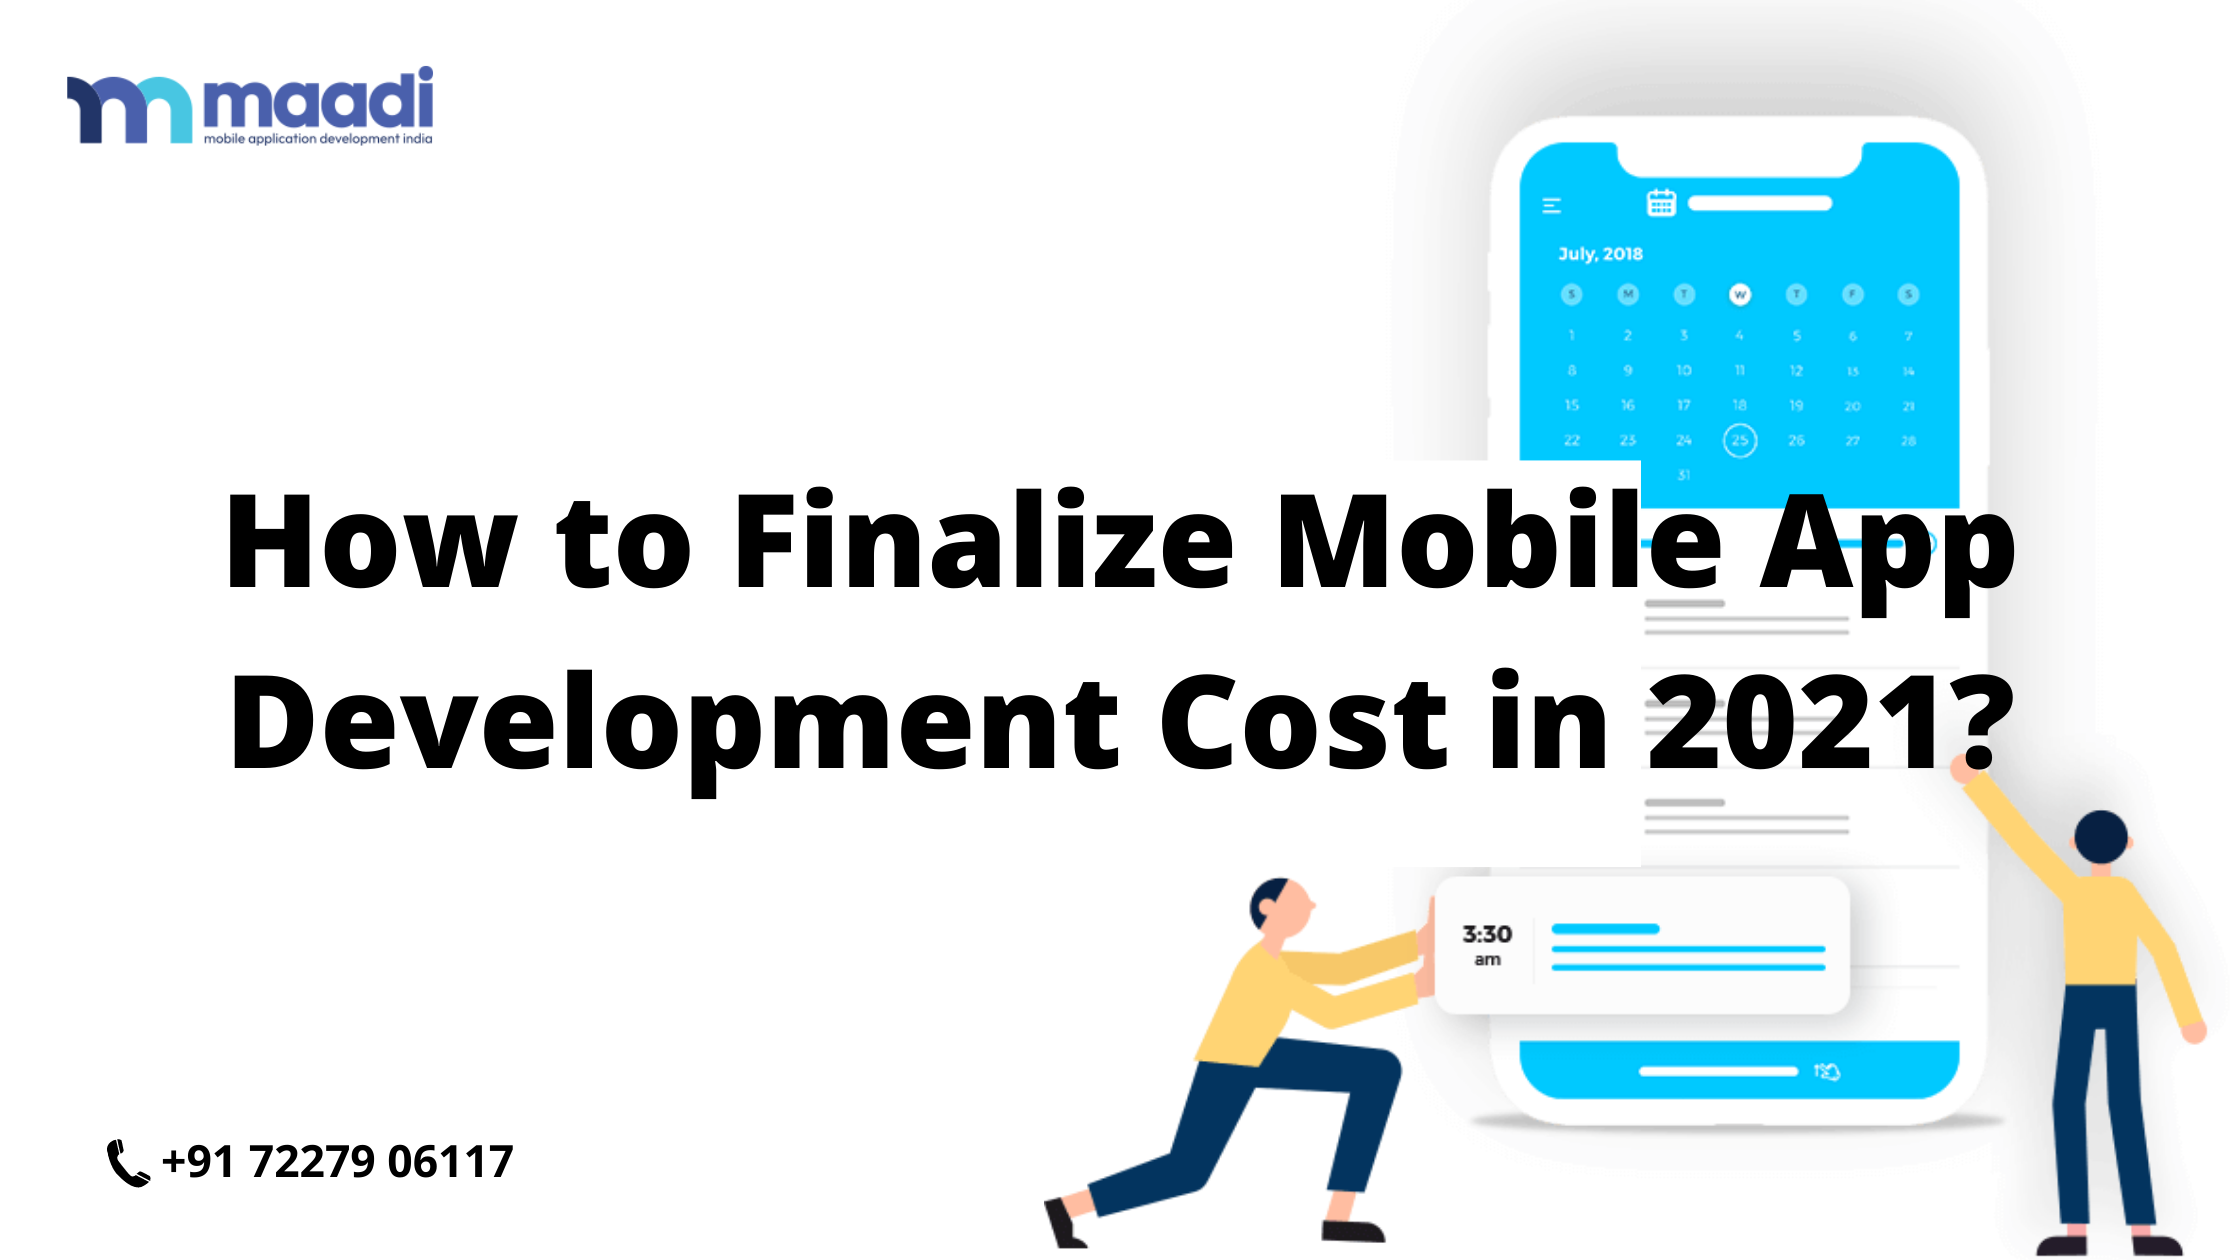 How to Finalize Mobile App Development Cost in 2021?